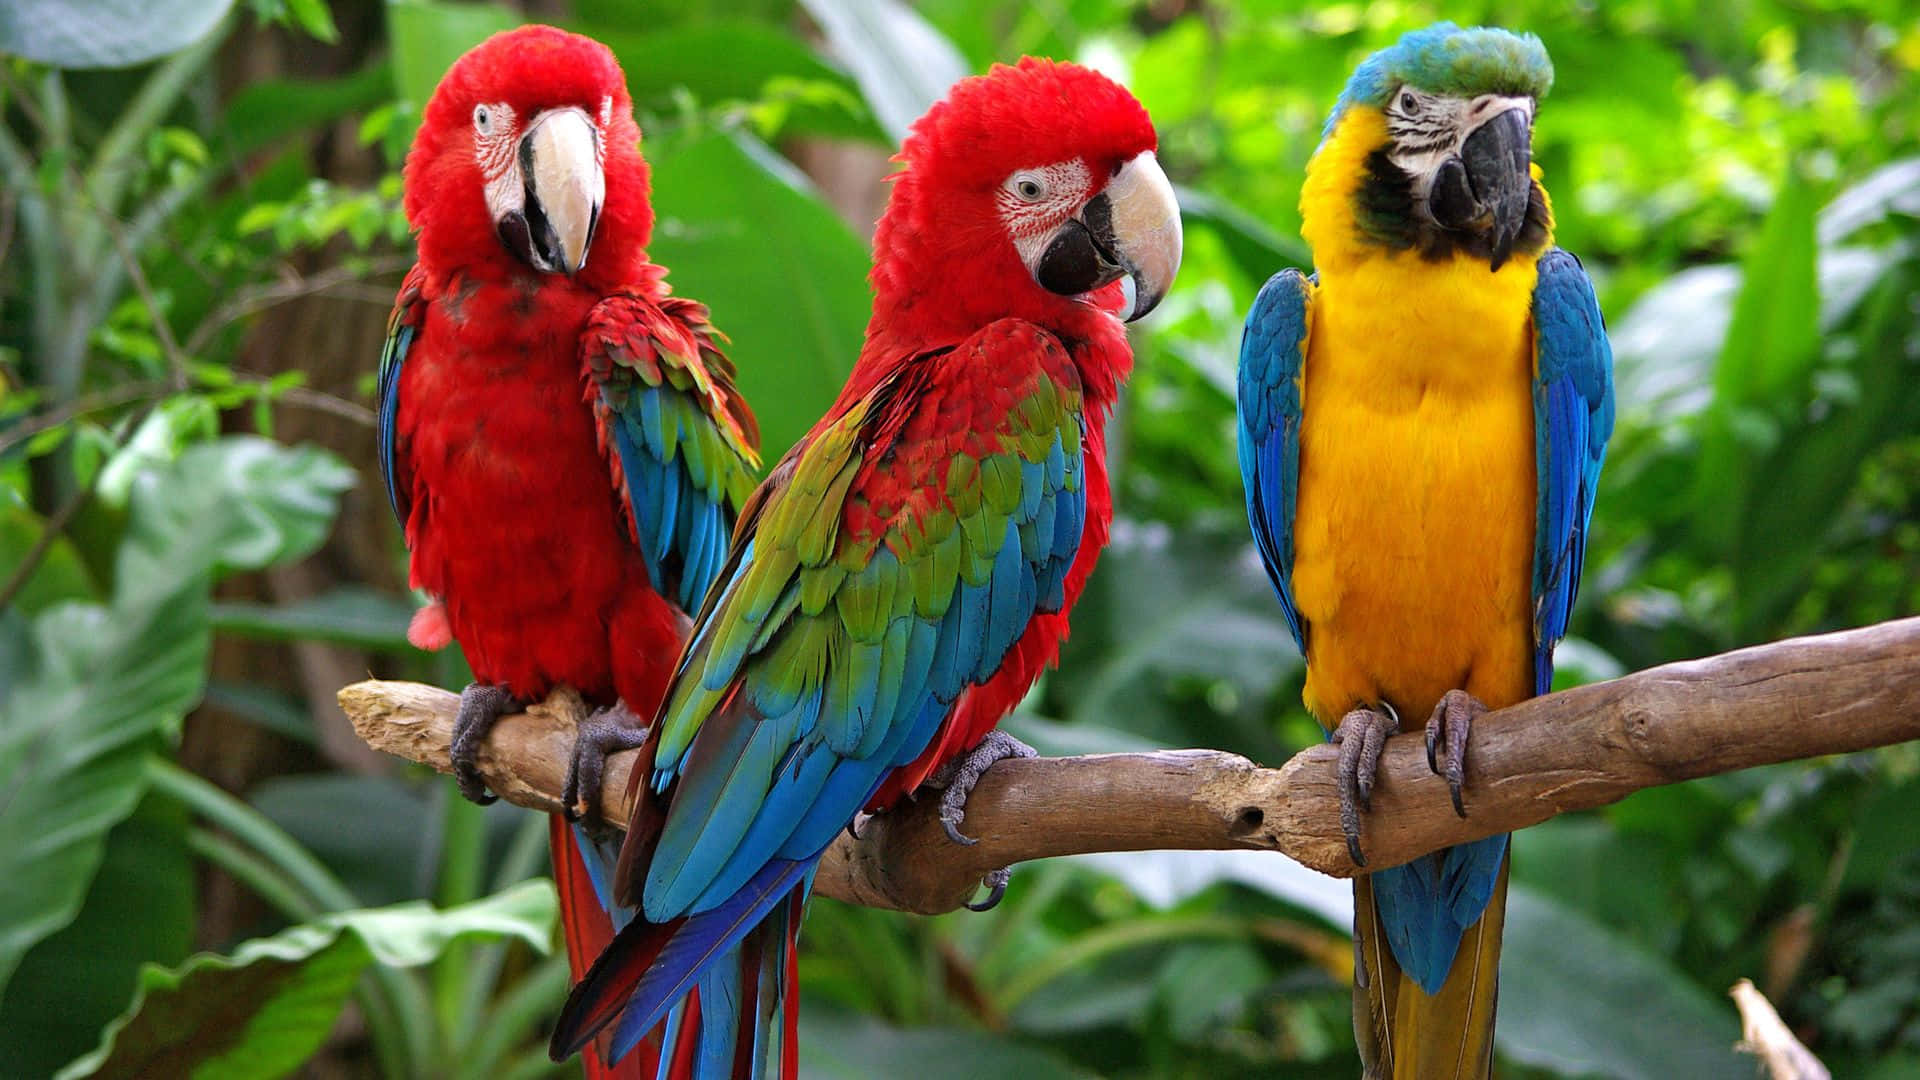 Three Colorful Parrots Sitting On A Branch